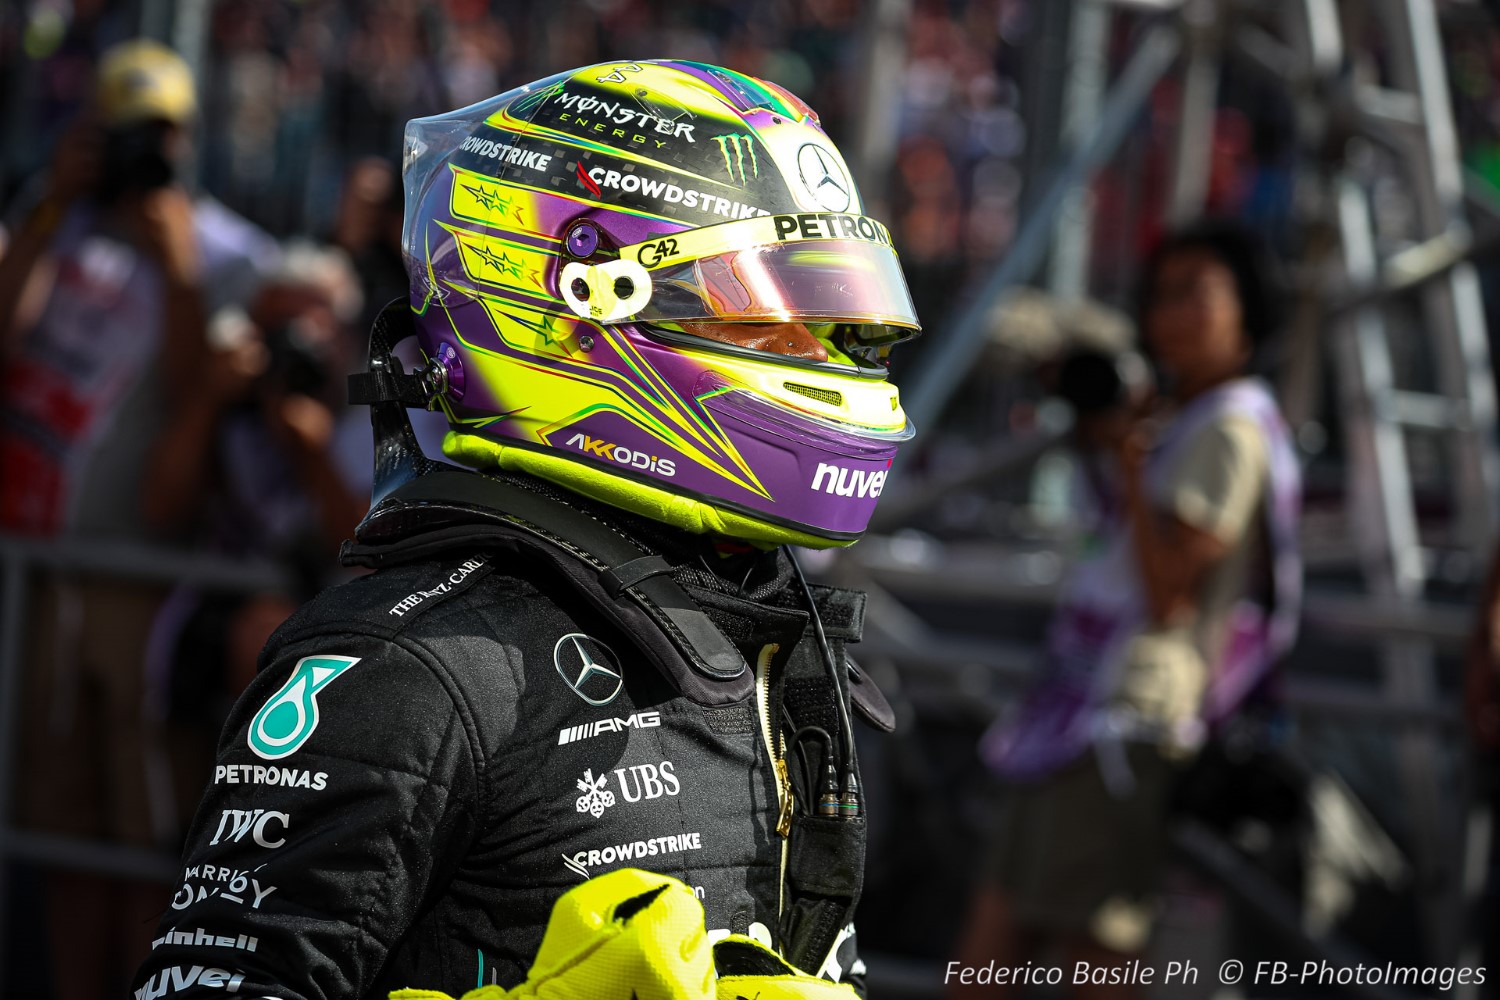 #44 Lewis Hamilton, (GRB) AMG Mercedes Ineos during the Hungarian GP, Budapest 20-23 July 2023 at the Hungaroring, Formula 1 World championship 2023.